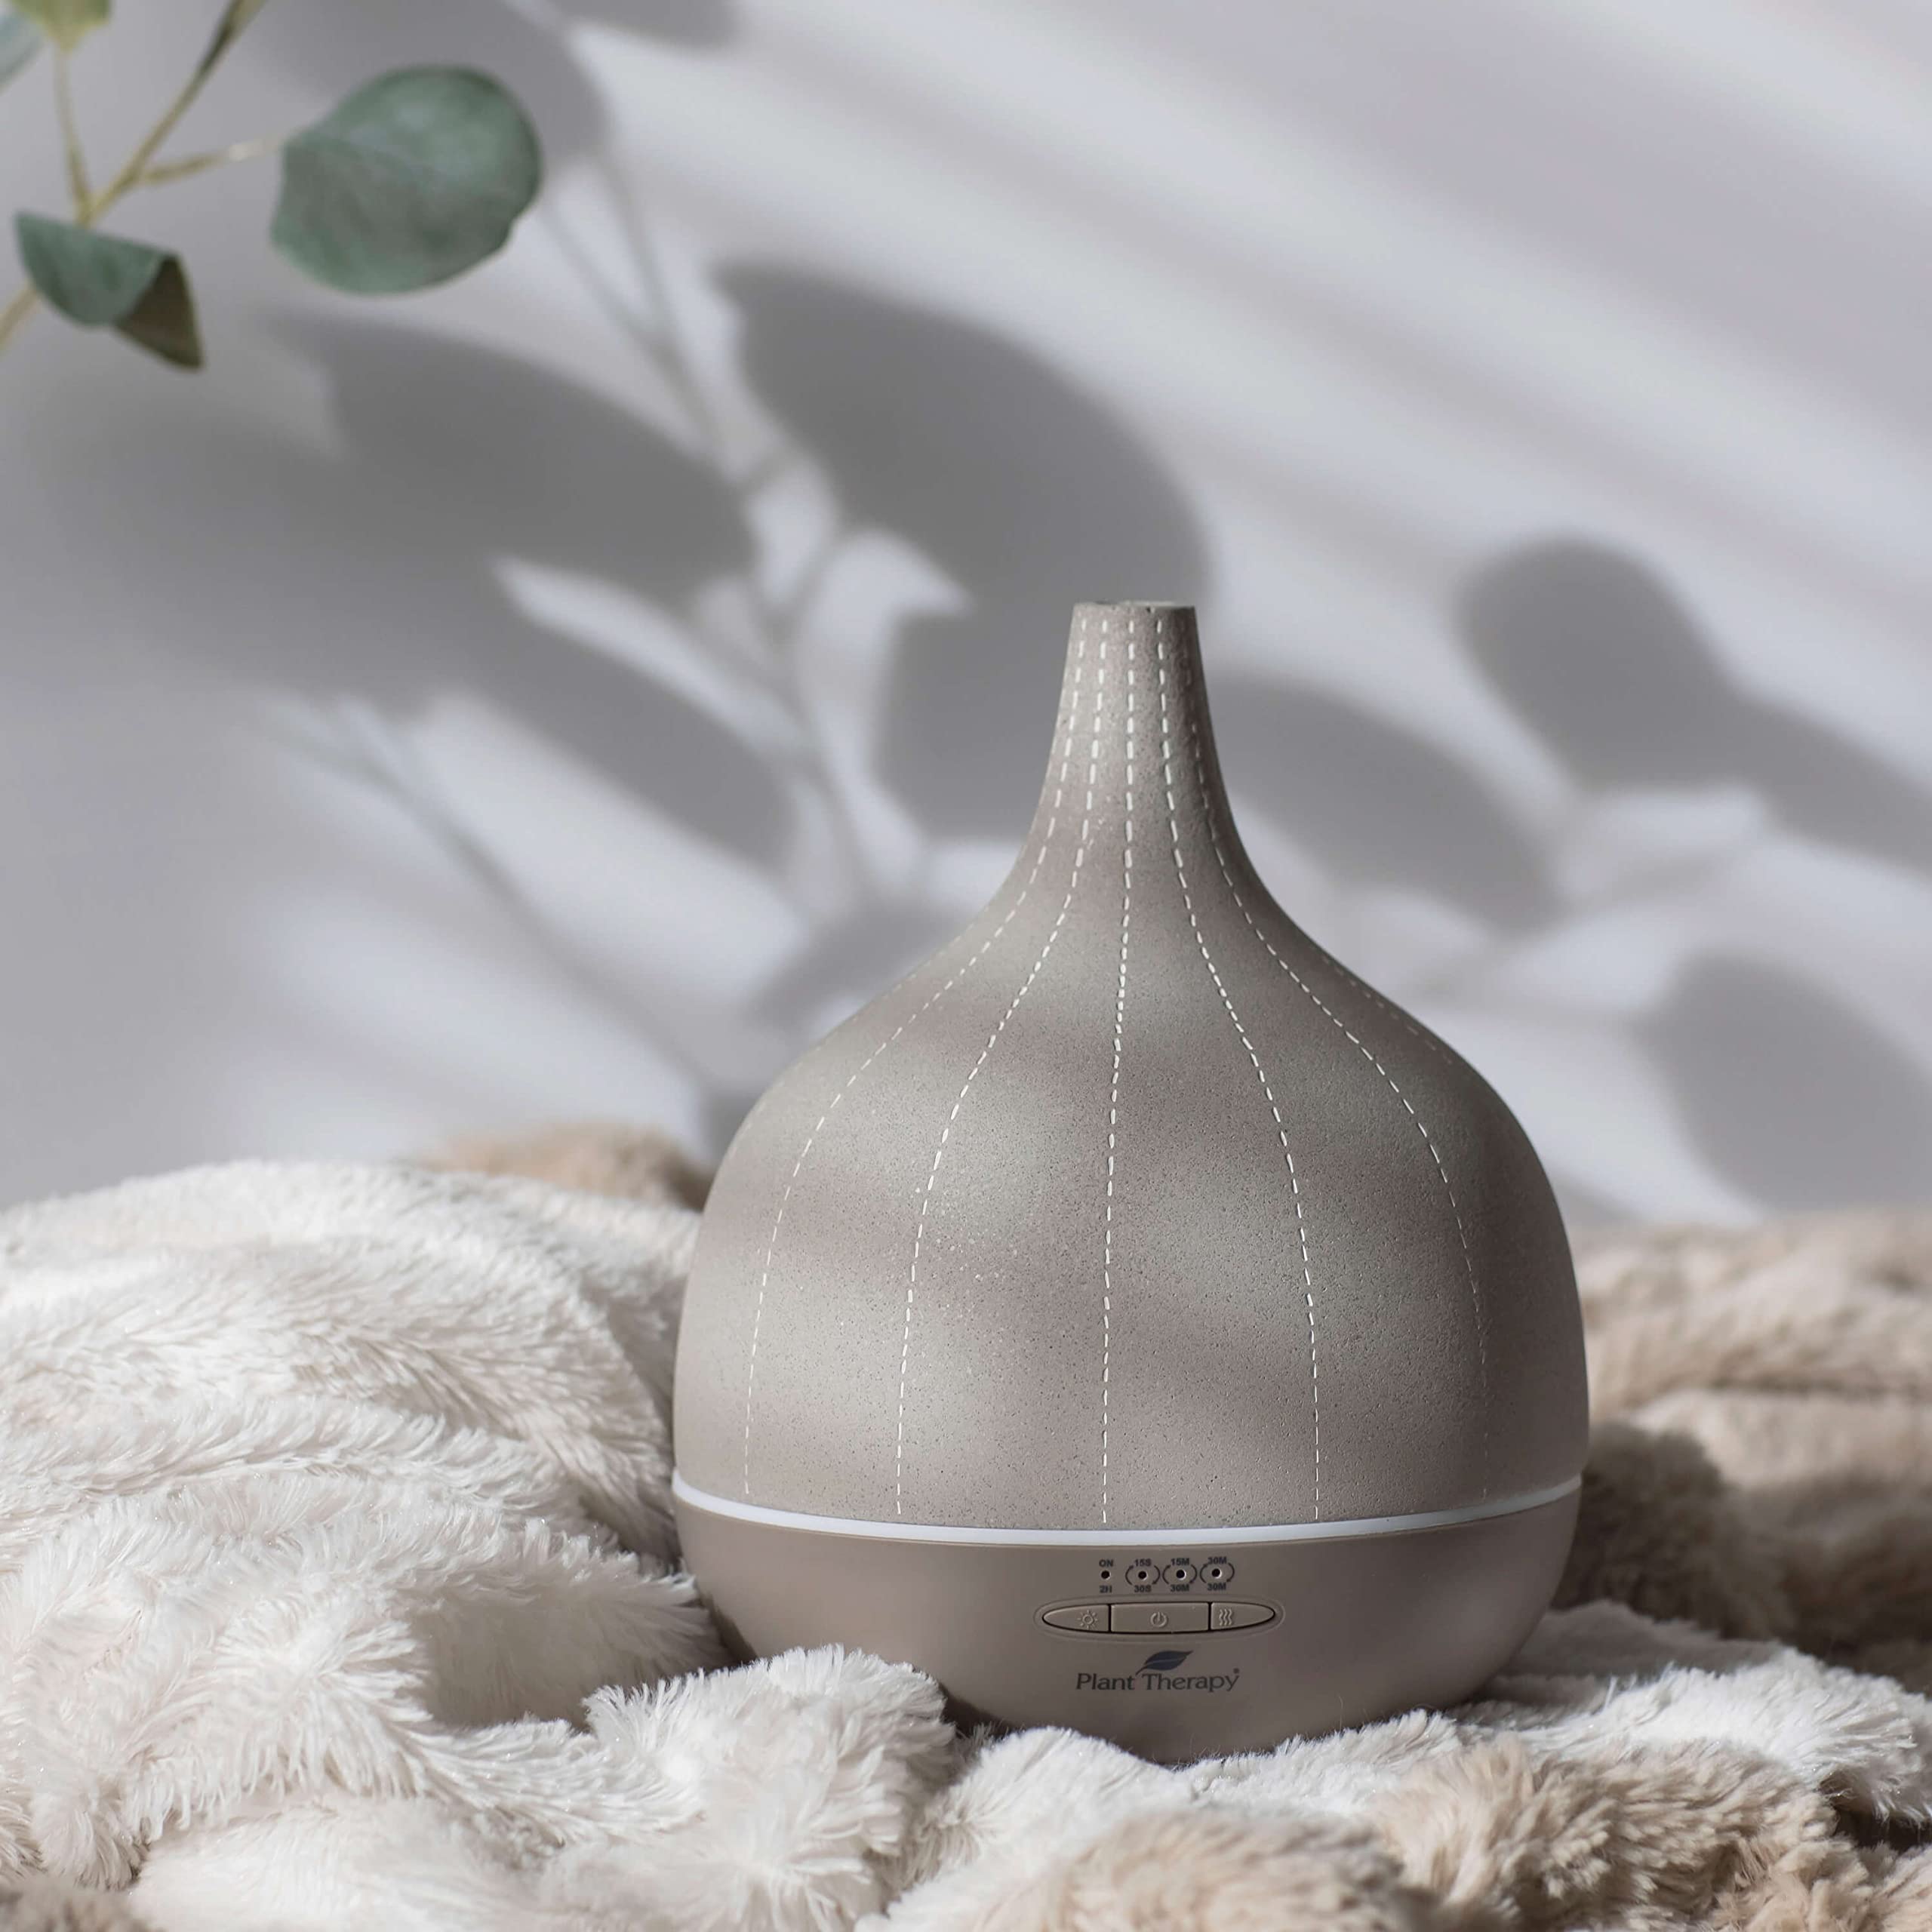 Plant Therapy Metro Stone Deluxe Diffuser Gray - Essential Oil Diffuser - Large Water Reservoir, 20 Hours of Diffusion, Auto Shut Off, Sleek Diffuser Design for Home & Office